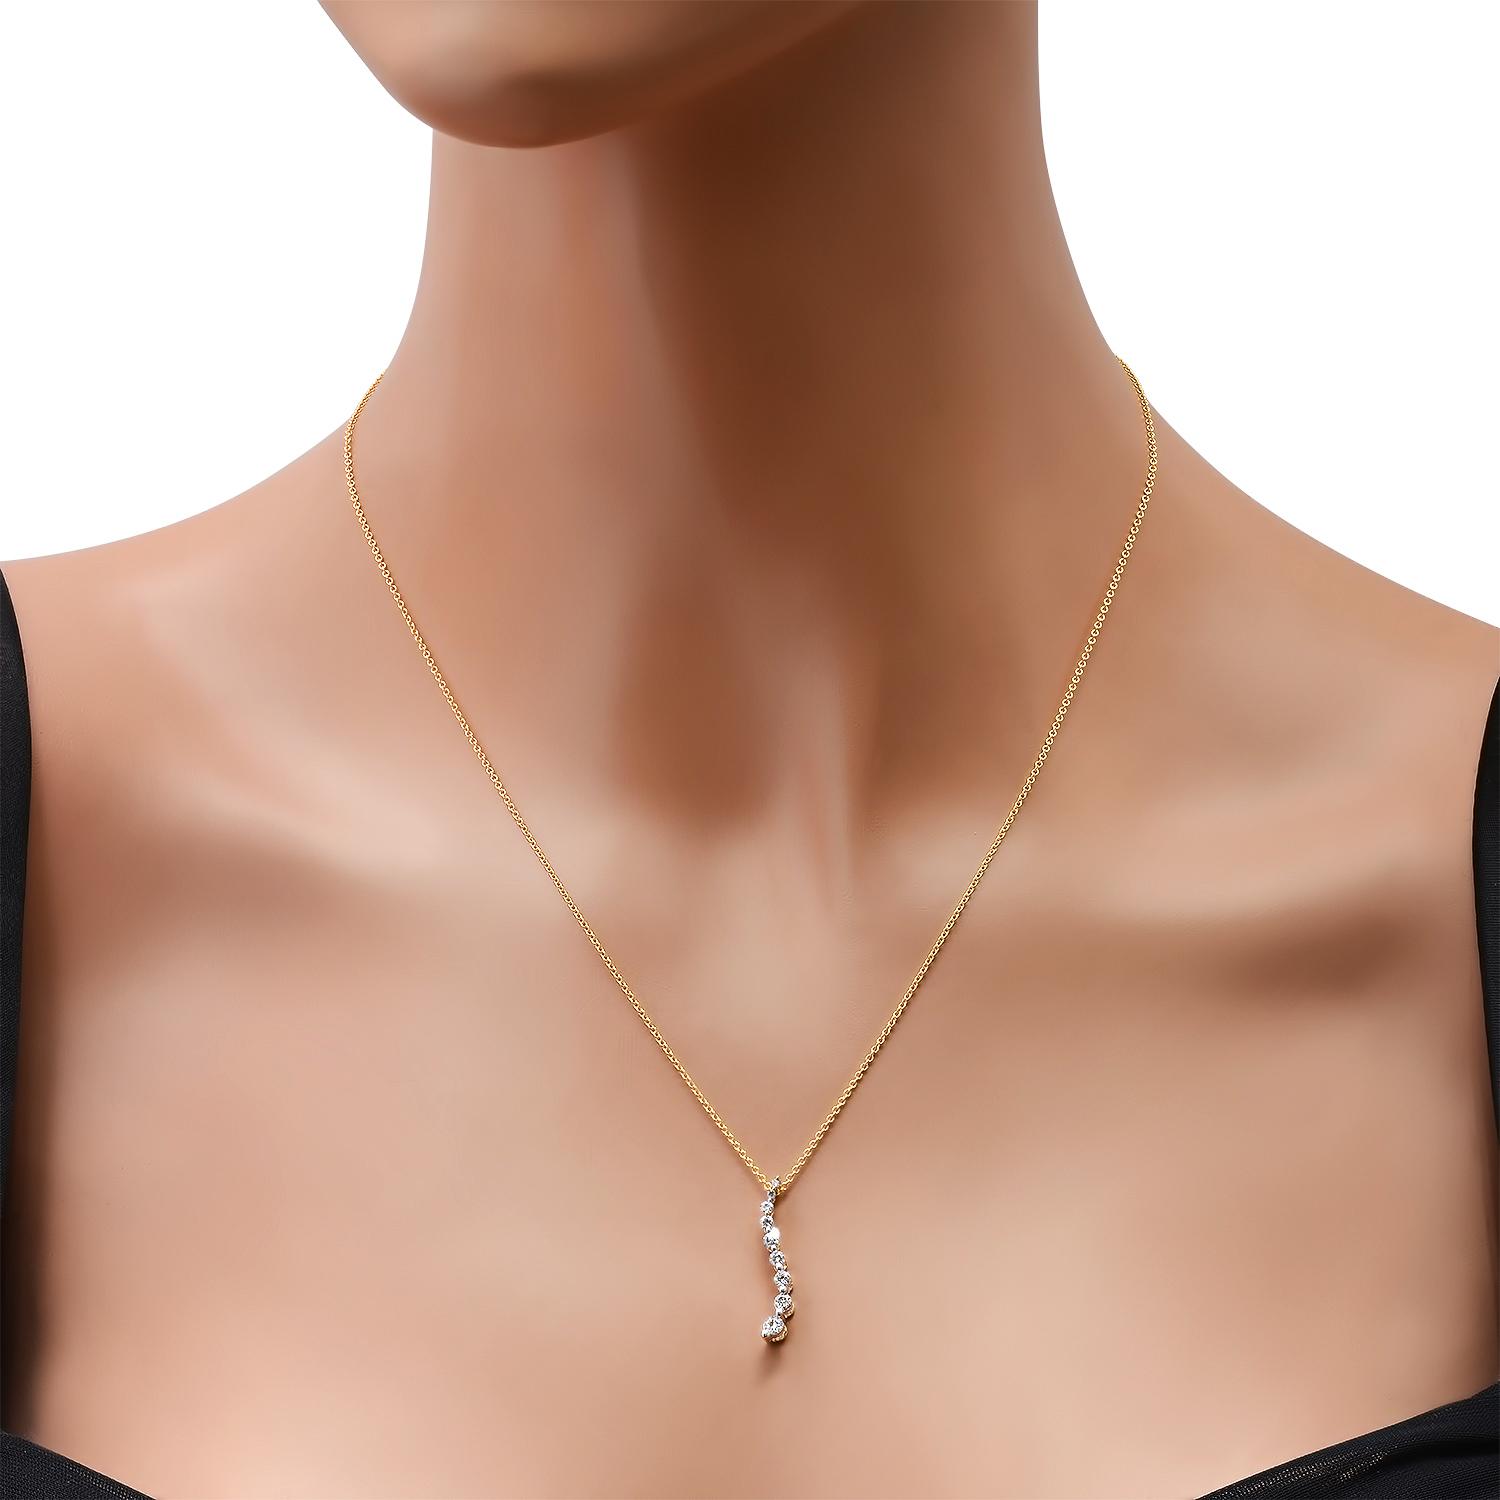 10K Yellow Gold Setting with 14K Yellow Gold Chain and 0.36ct Diamond Pendant